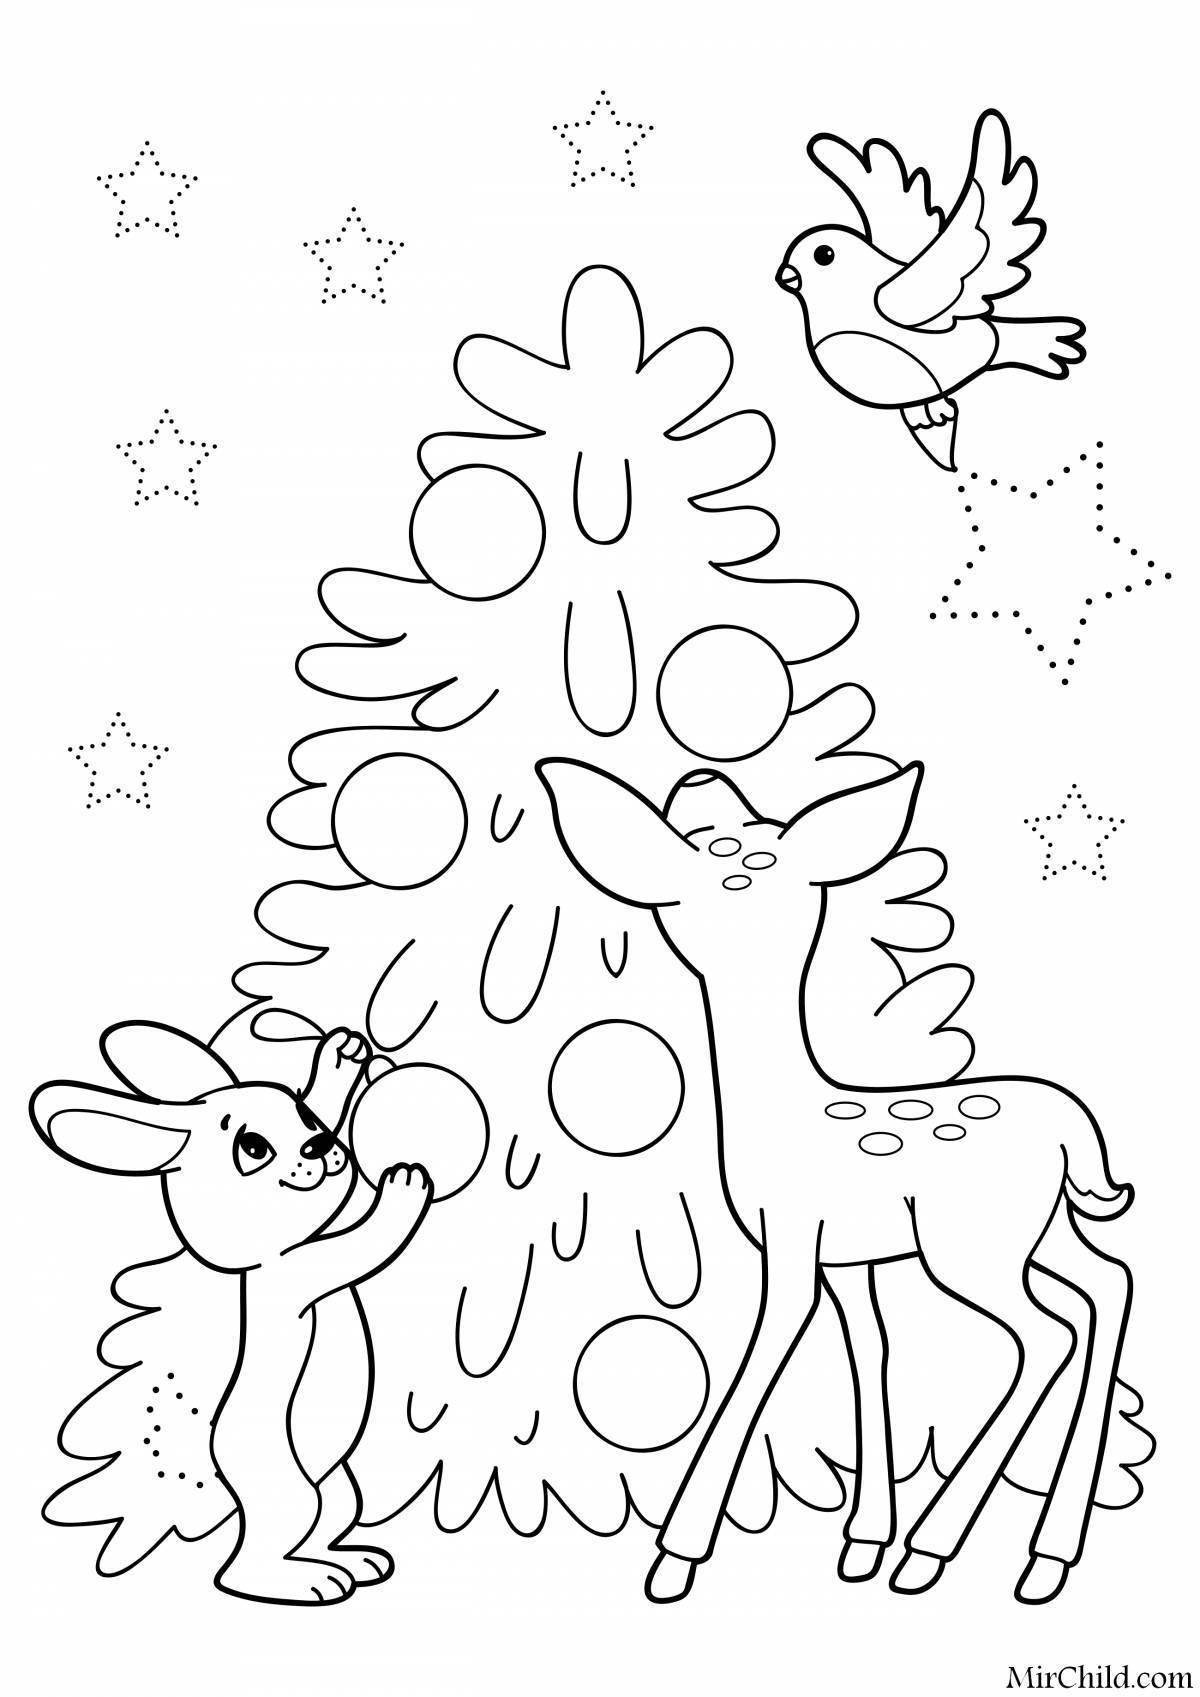 Colorful Christmas tree coloring book for kids 5-6 years old